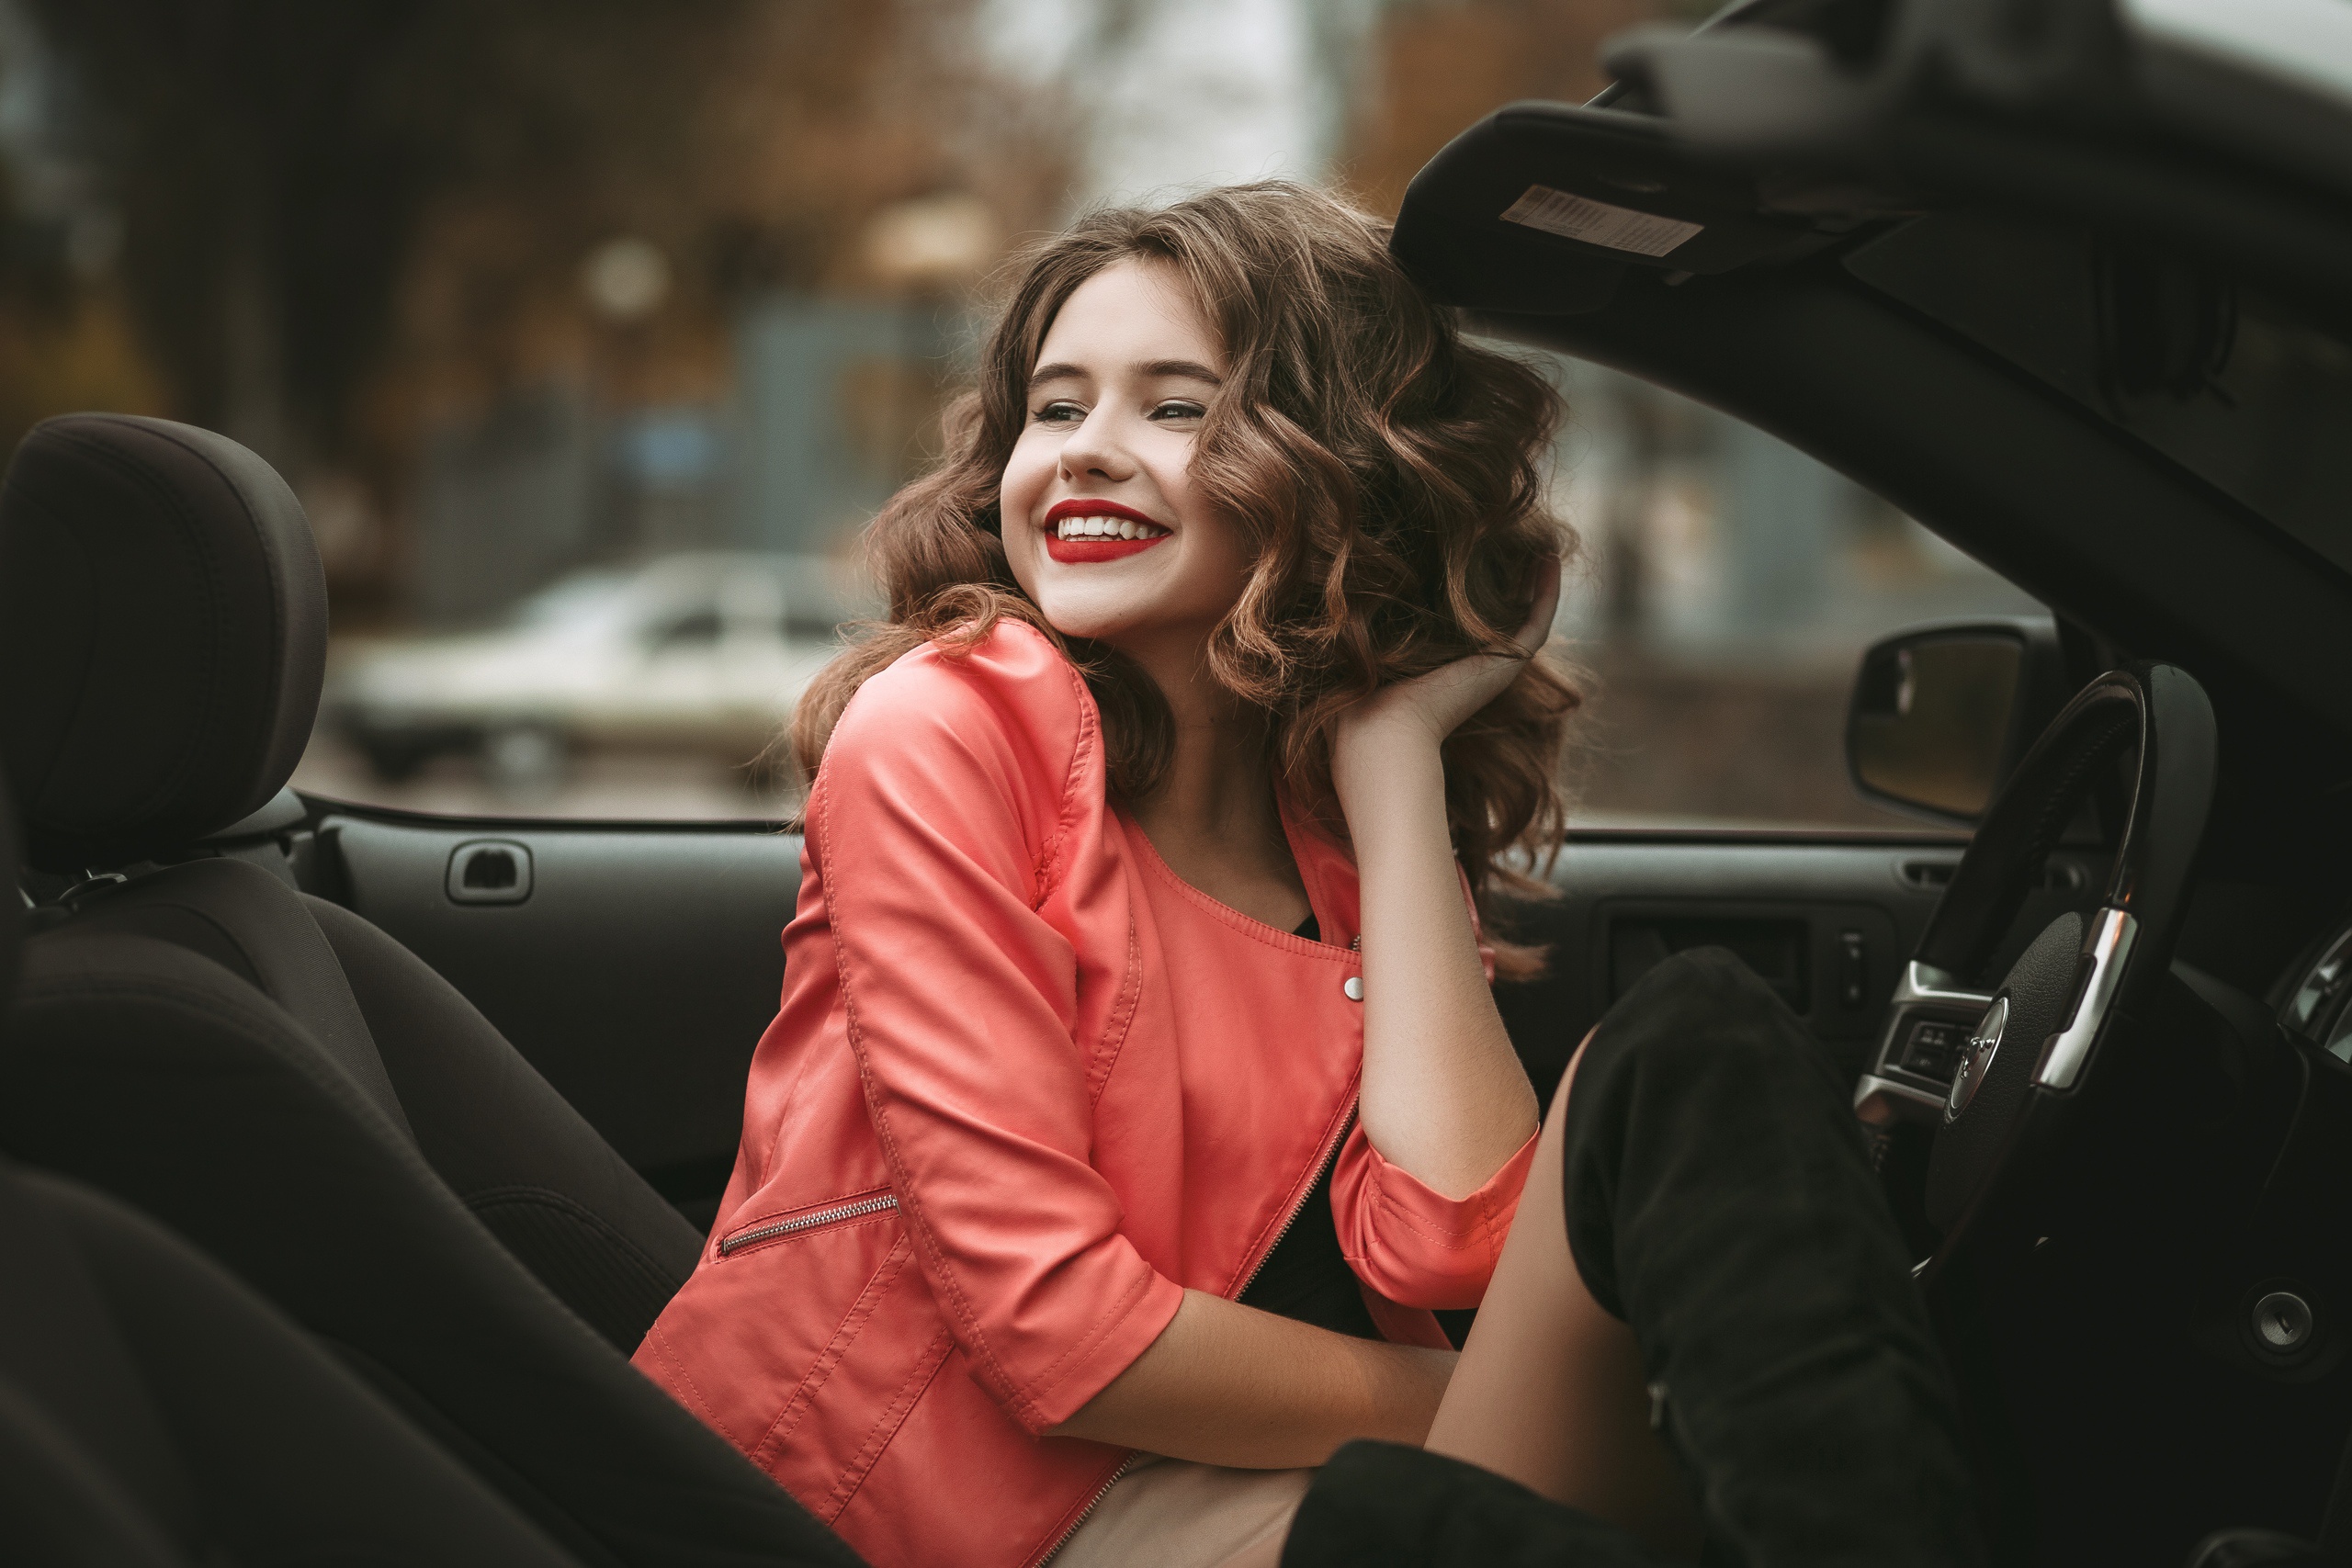 People 2560x1707 model red lipstick smiling orange clothing hands in hair spiral hair women with cars women outdoors brunette